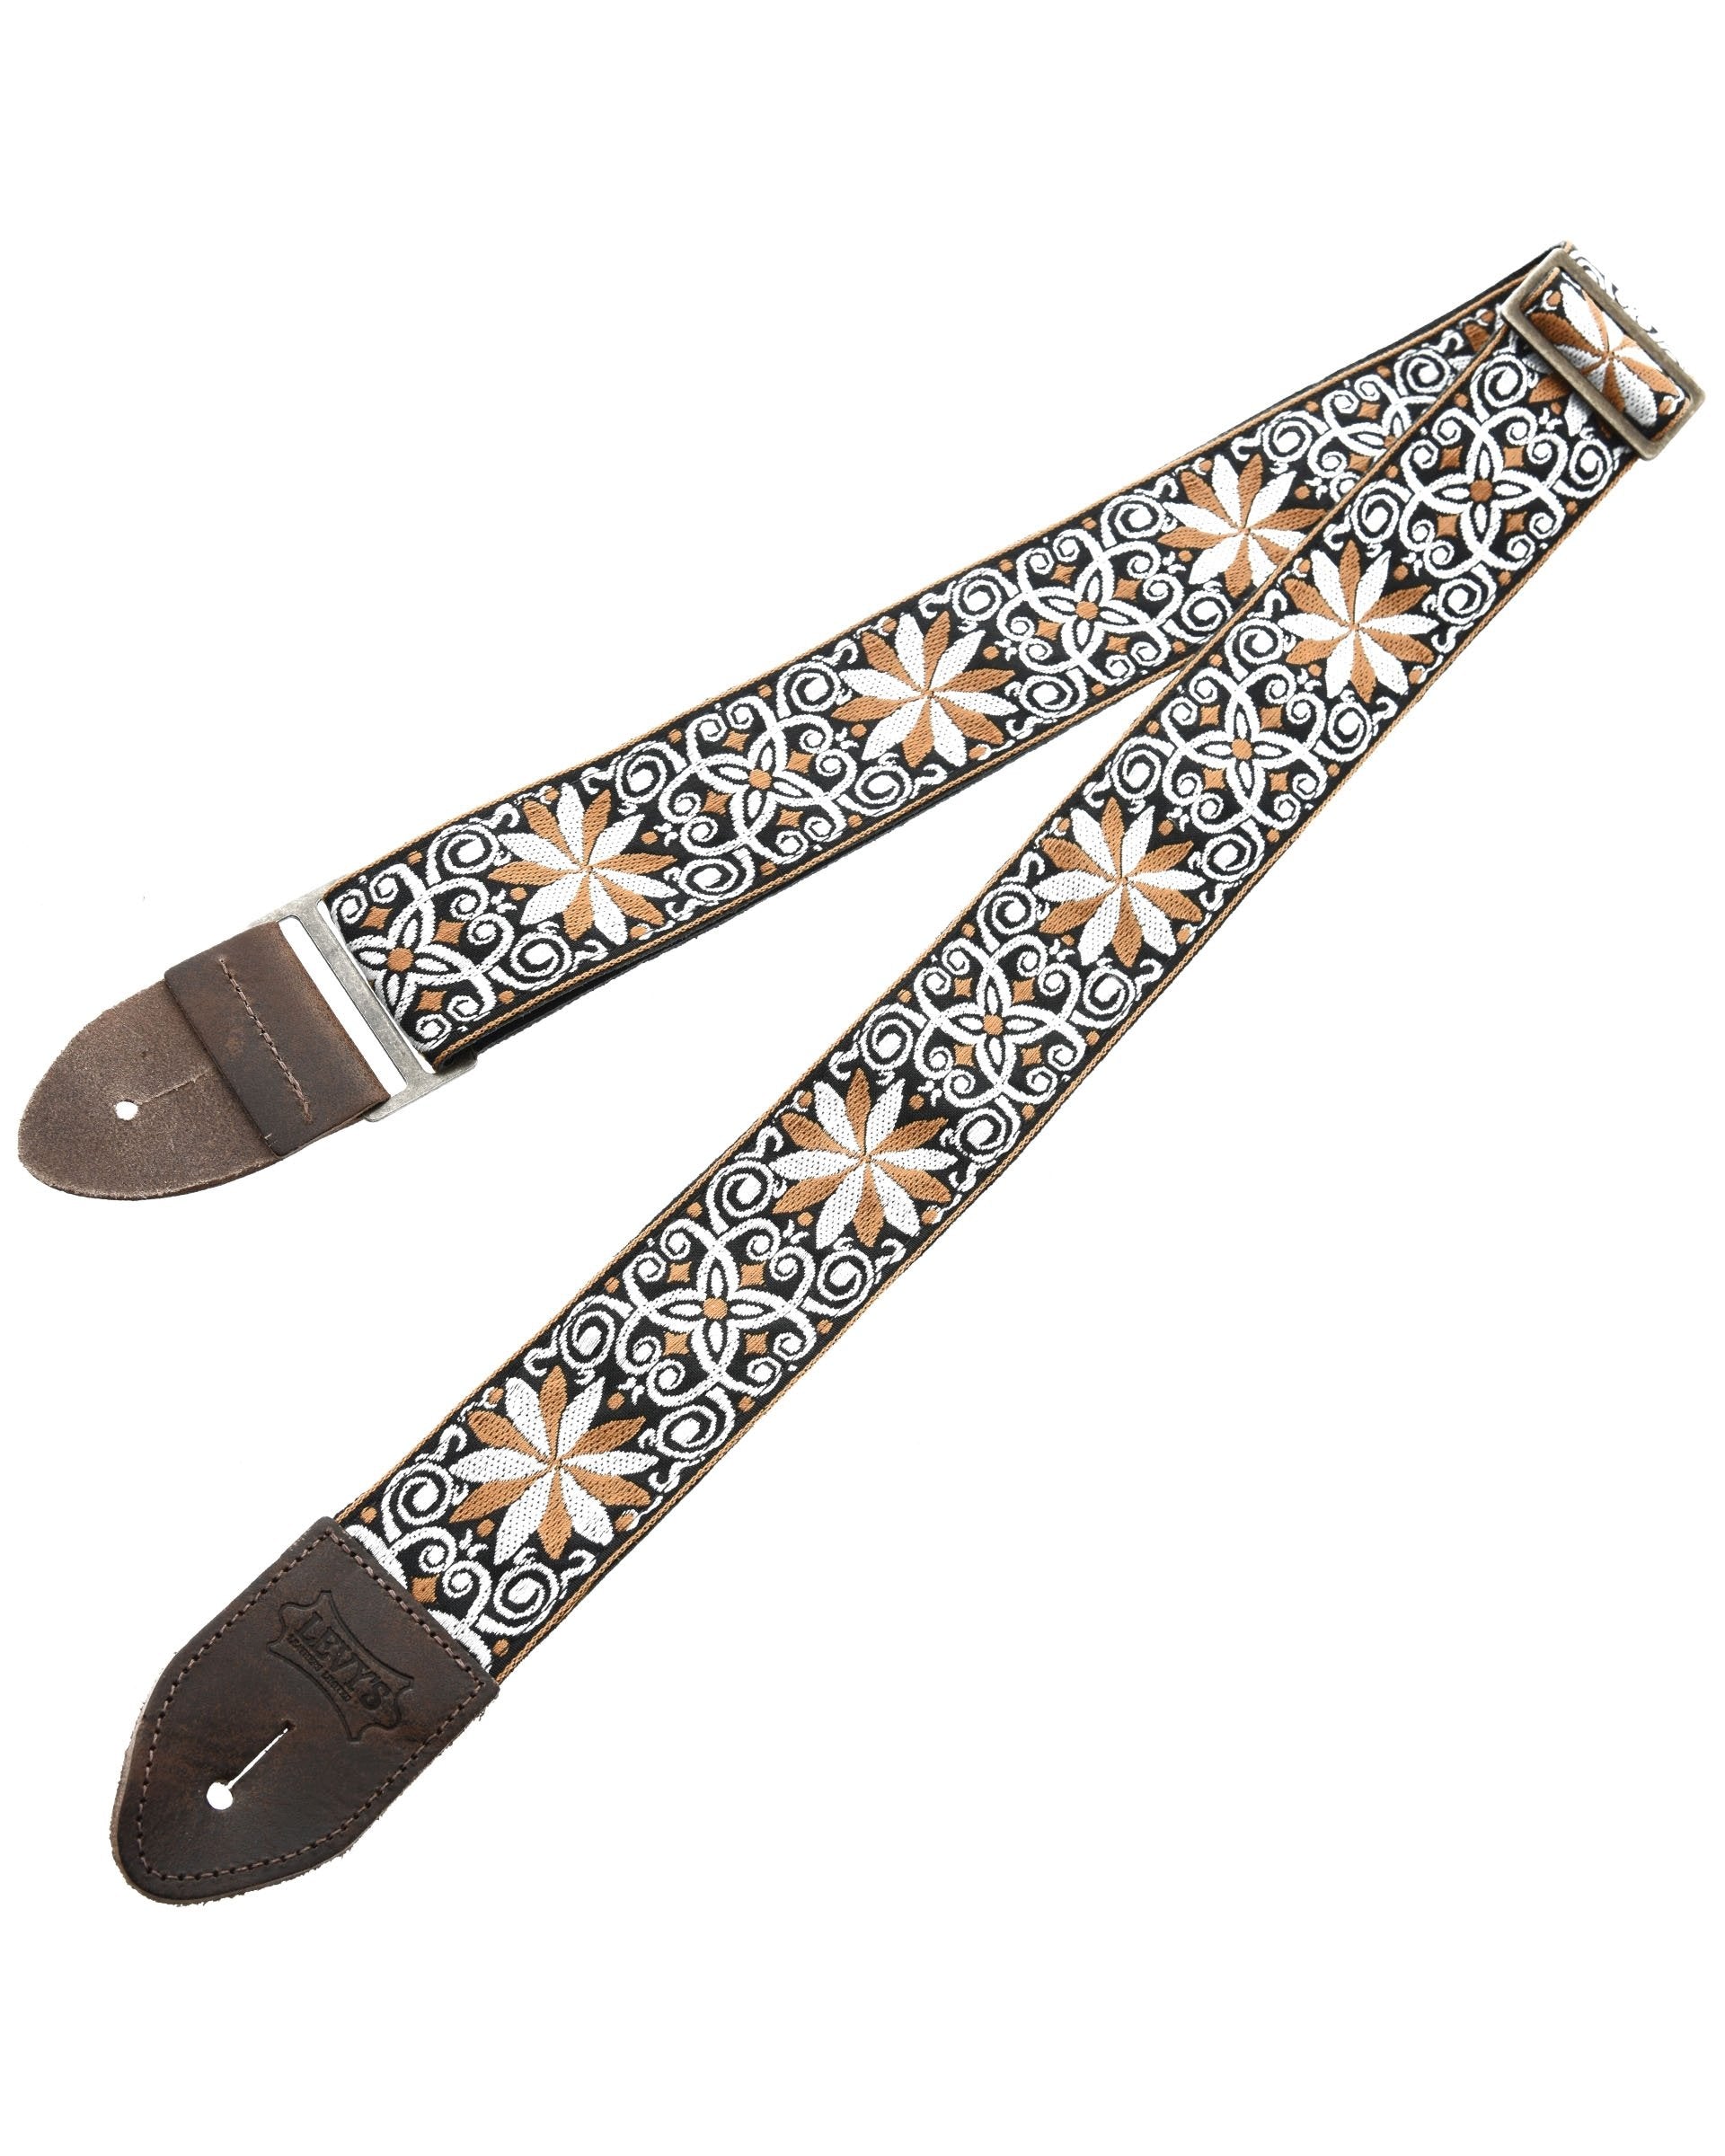 Image 1 of Levy 2" Jacquard Weave Guitar Strap with Hootenanny Design - SKU# M8HTV-13 : Product Type Accessories & Parts : Elderly Instruments